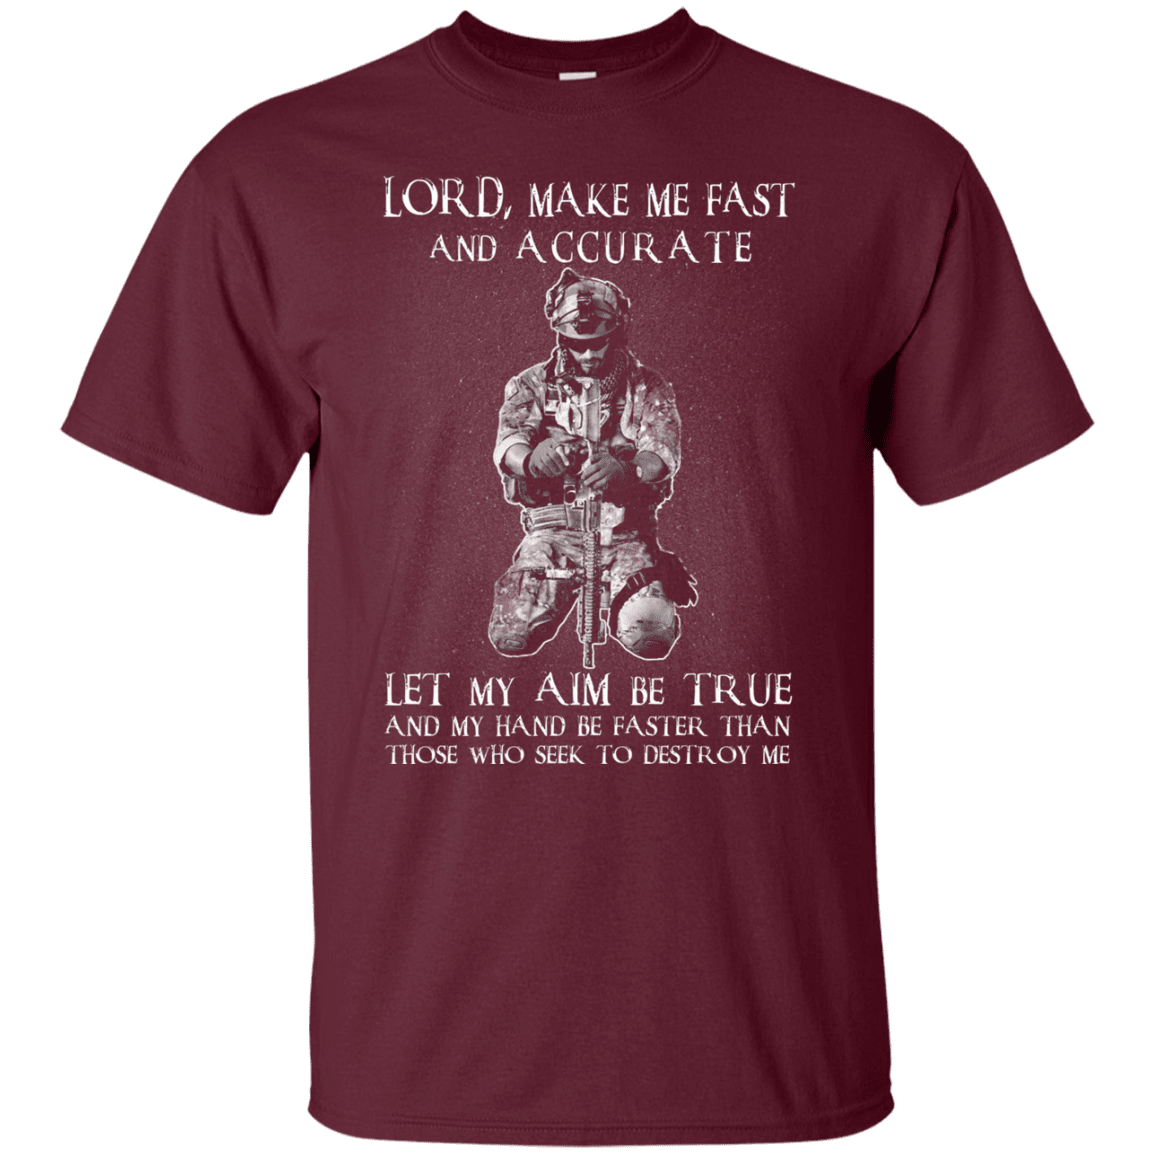 Military T-Shirt "LORD MAKE ME FAST AND ACCURATE"-TShirt-General-Veterans Nation